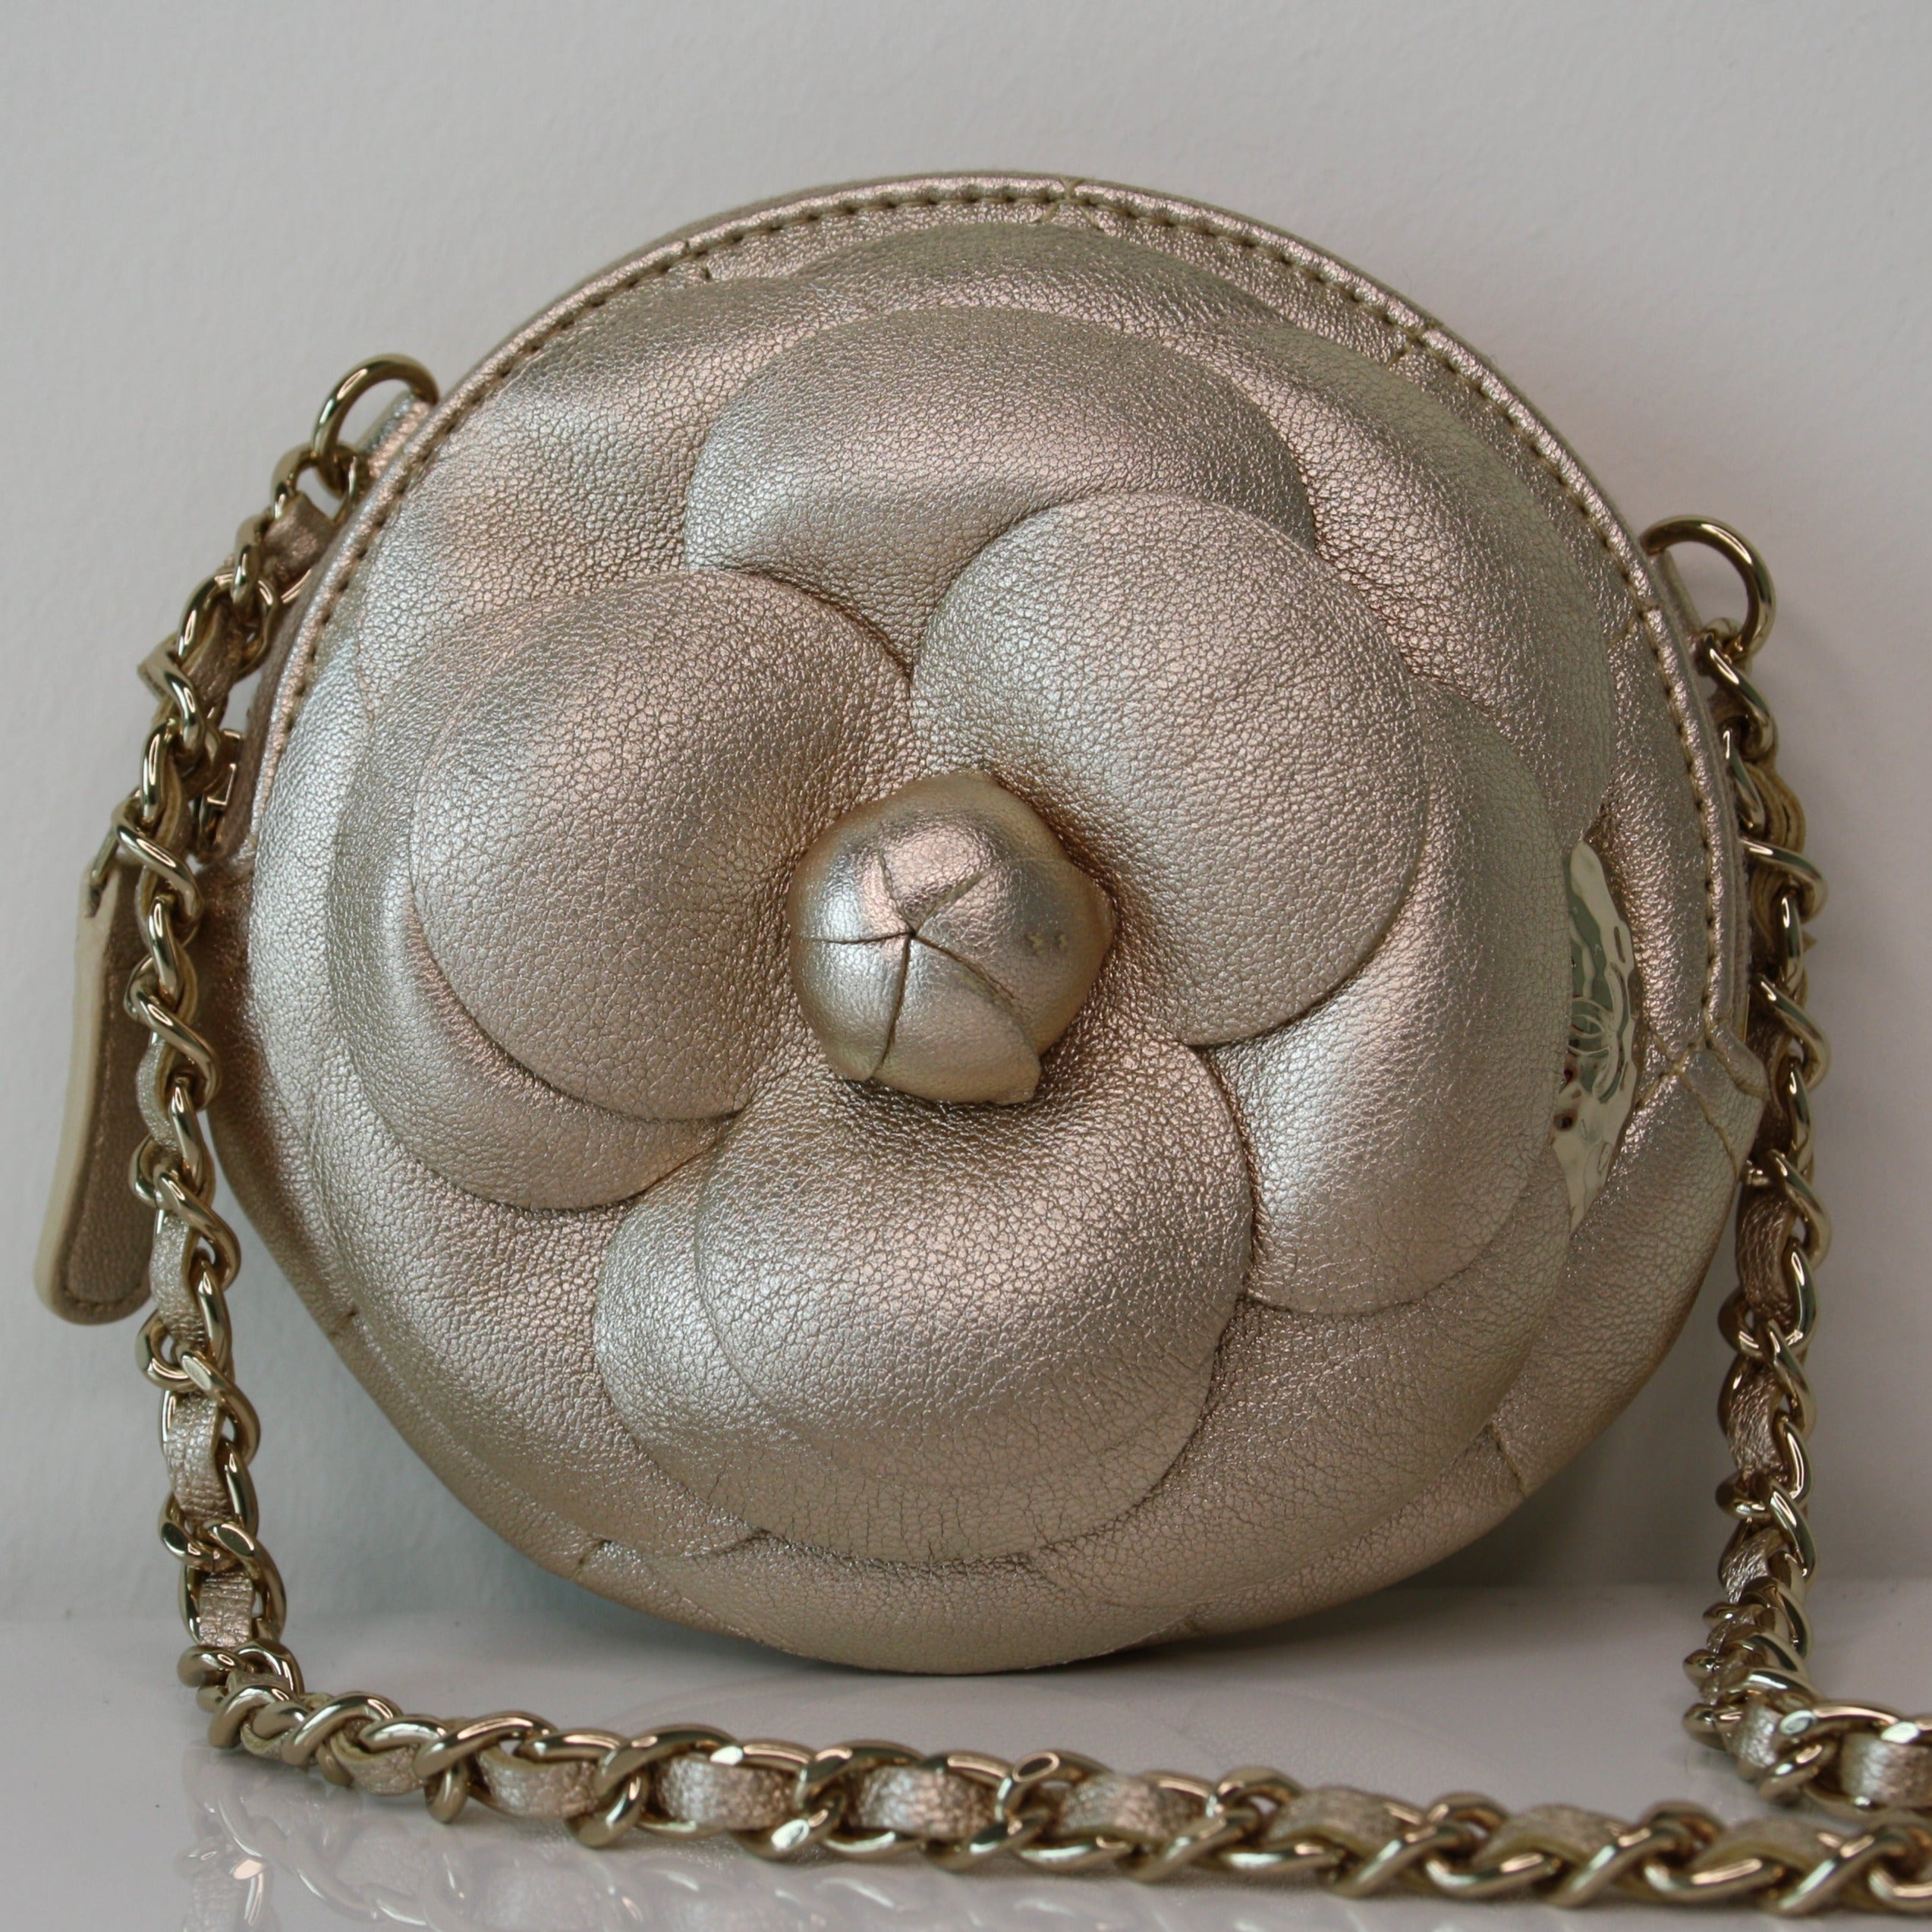 Chanel Grey Chèvre Camellia Embossed Round Clutch With Chain